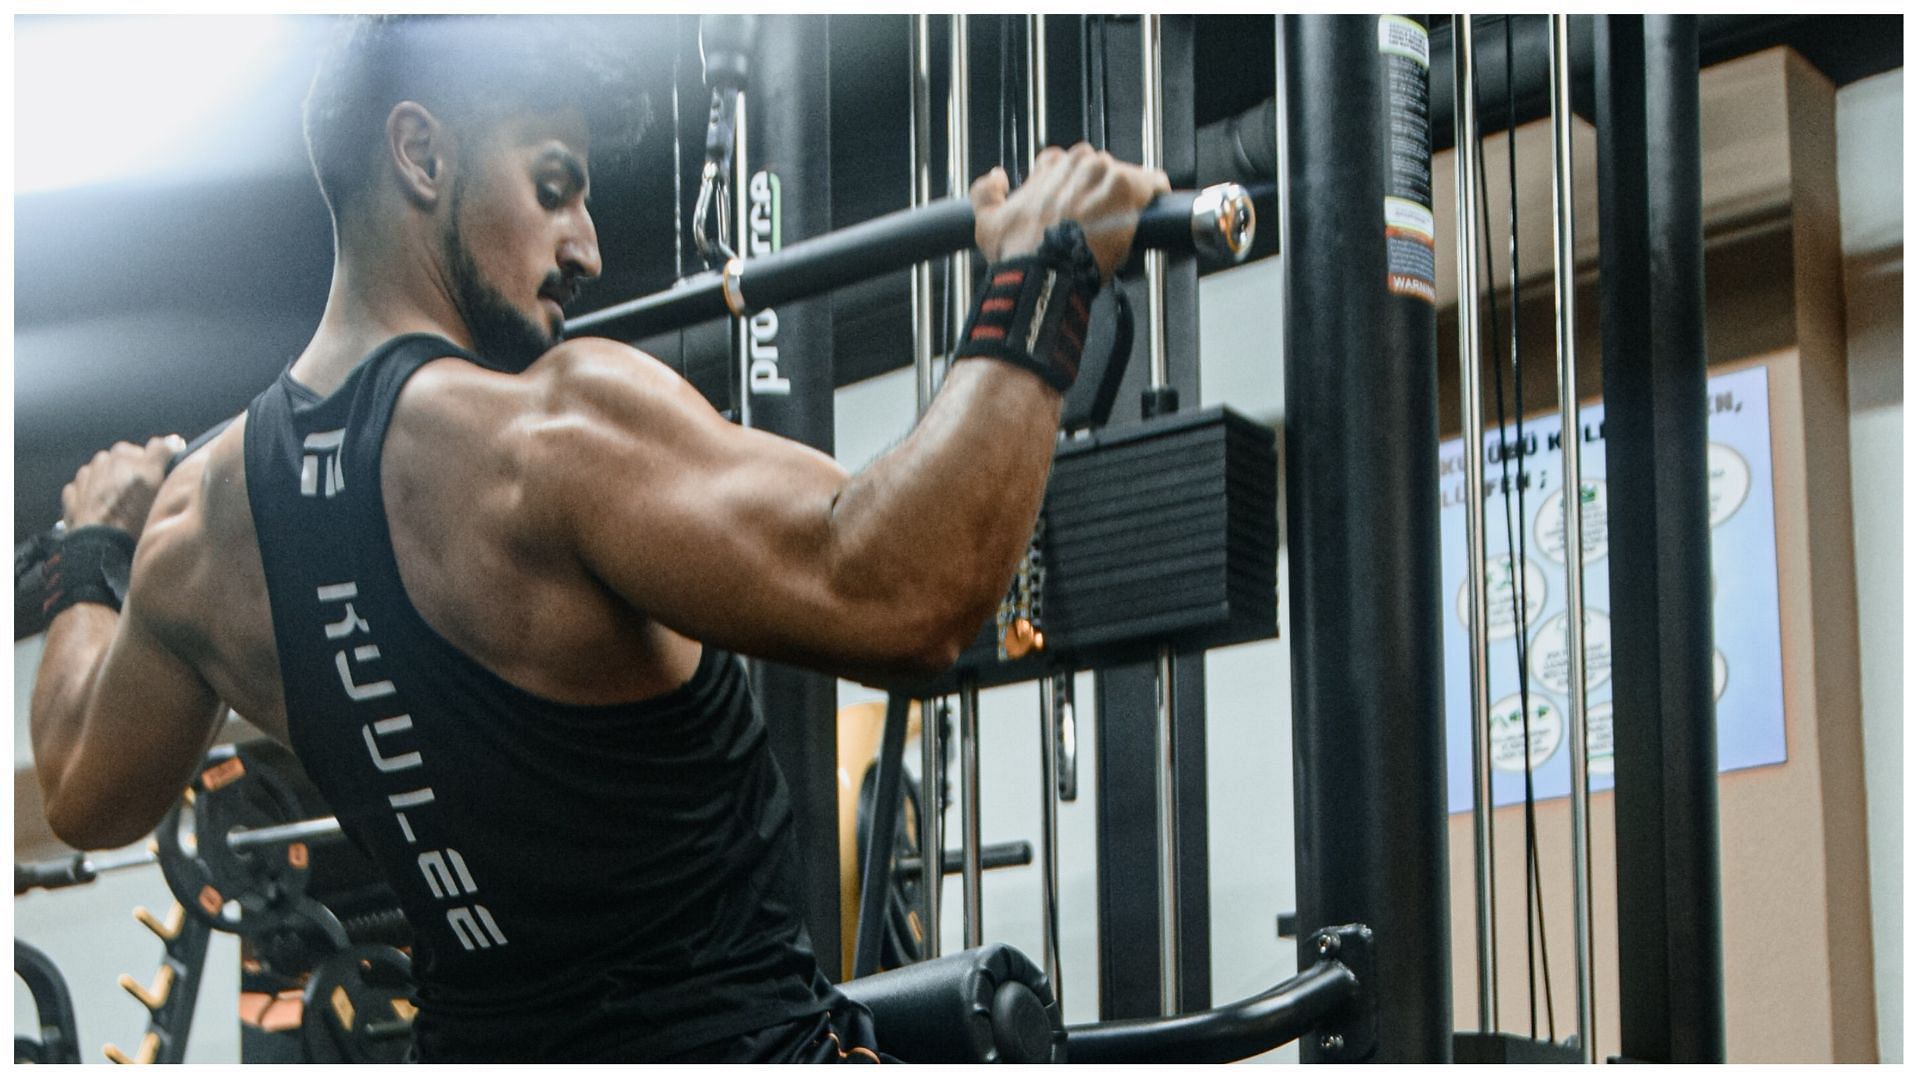 Perform wide-grip lat pulldowns to develop wide lats (Image via Pexels)